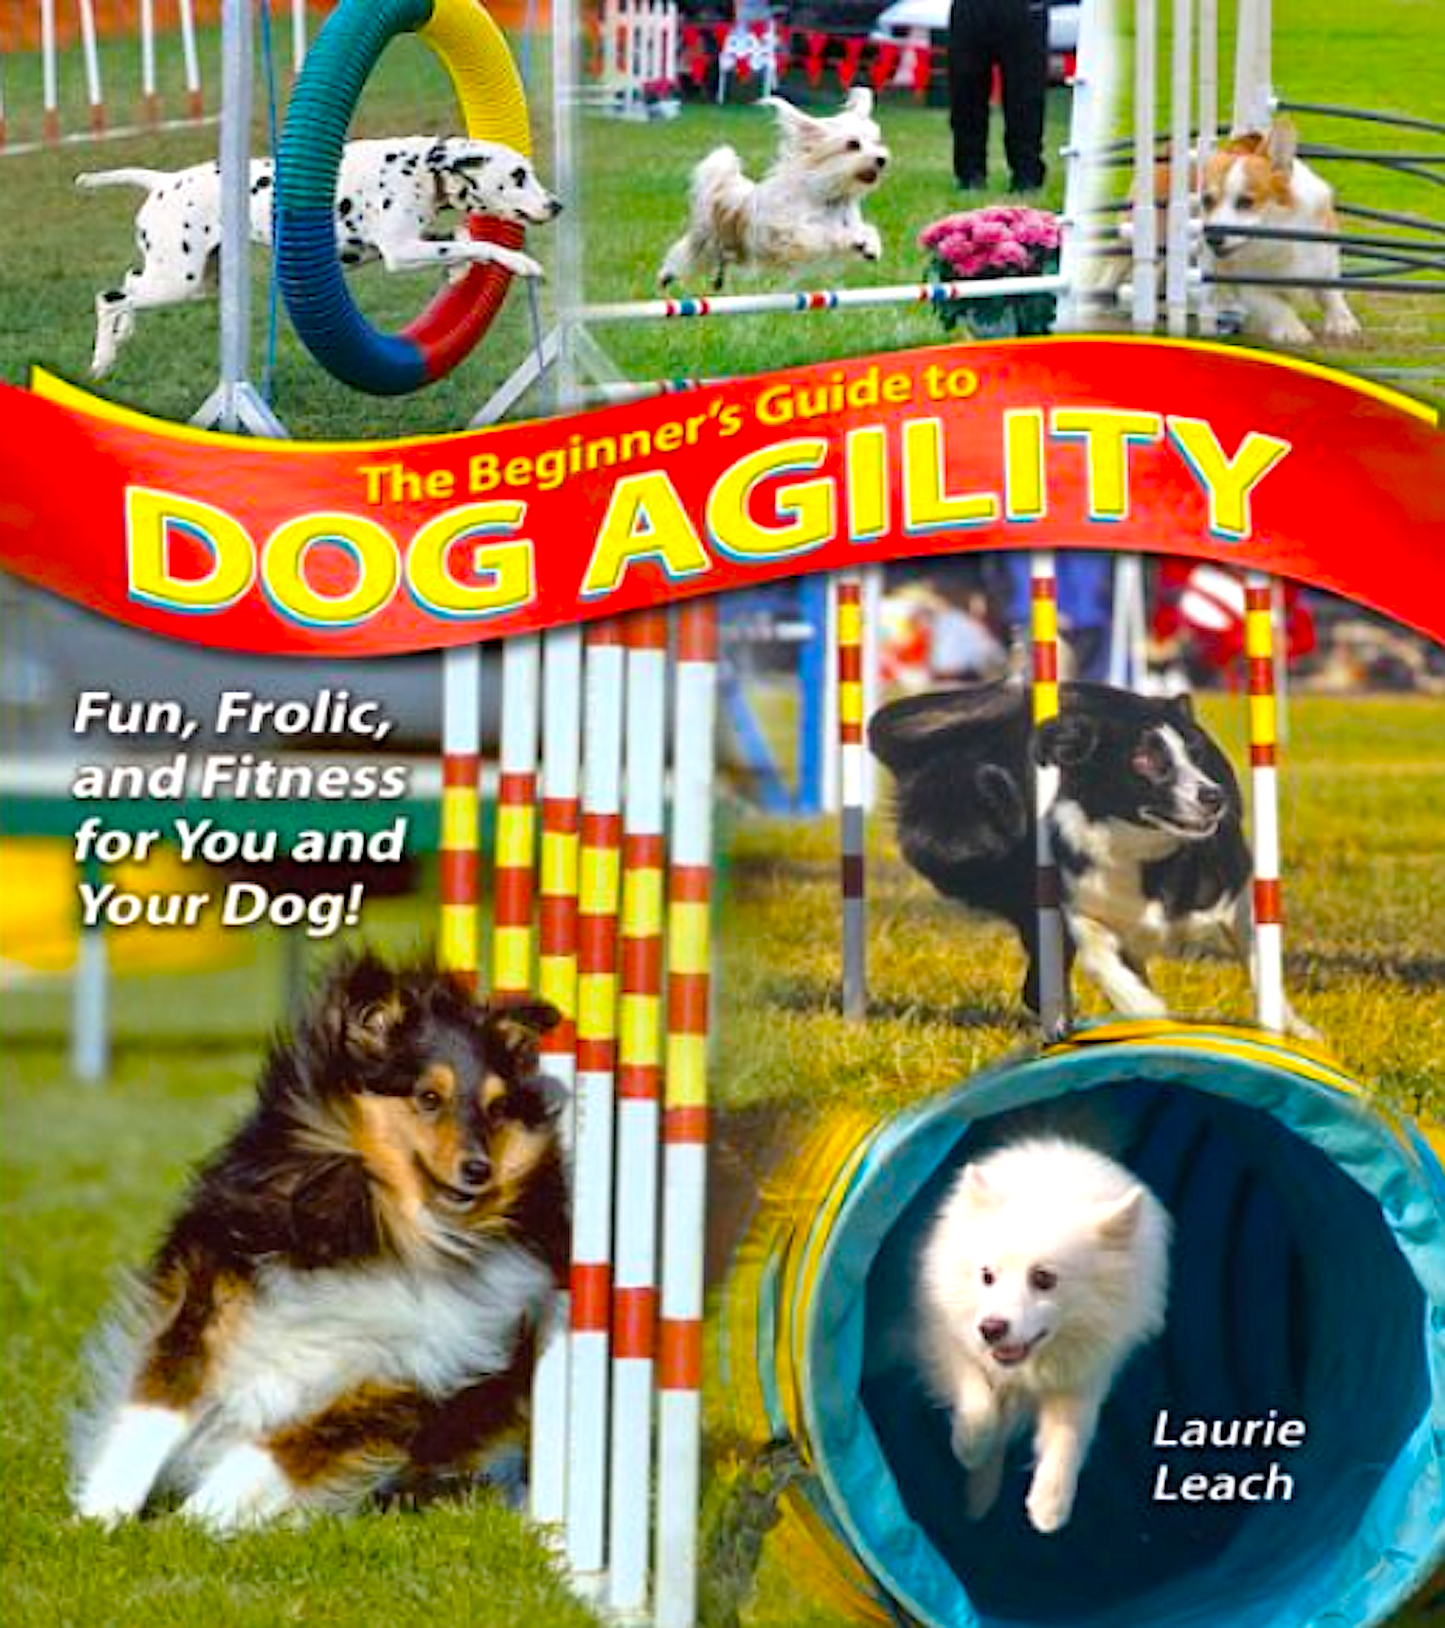 THE BEGINNER'S GUIDE TO DOG AGILITY: everything you need to know